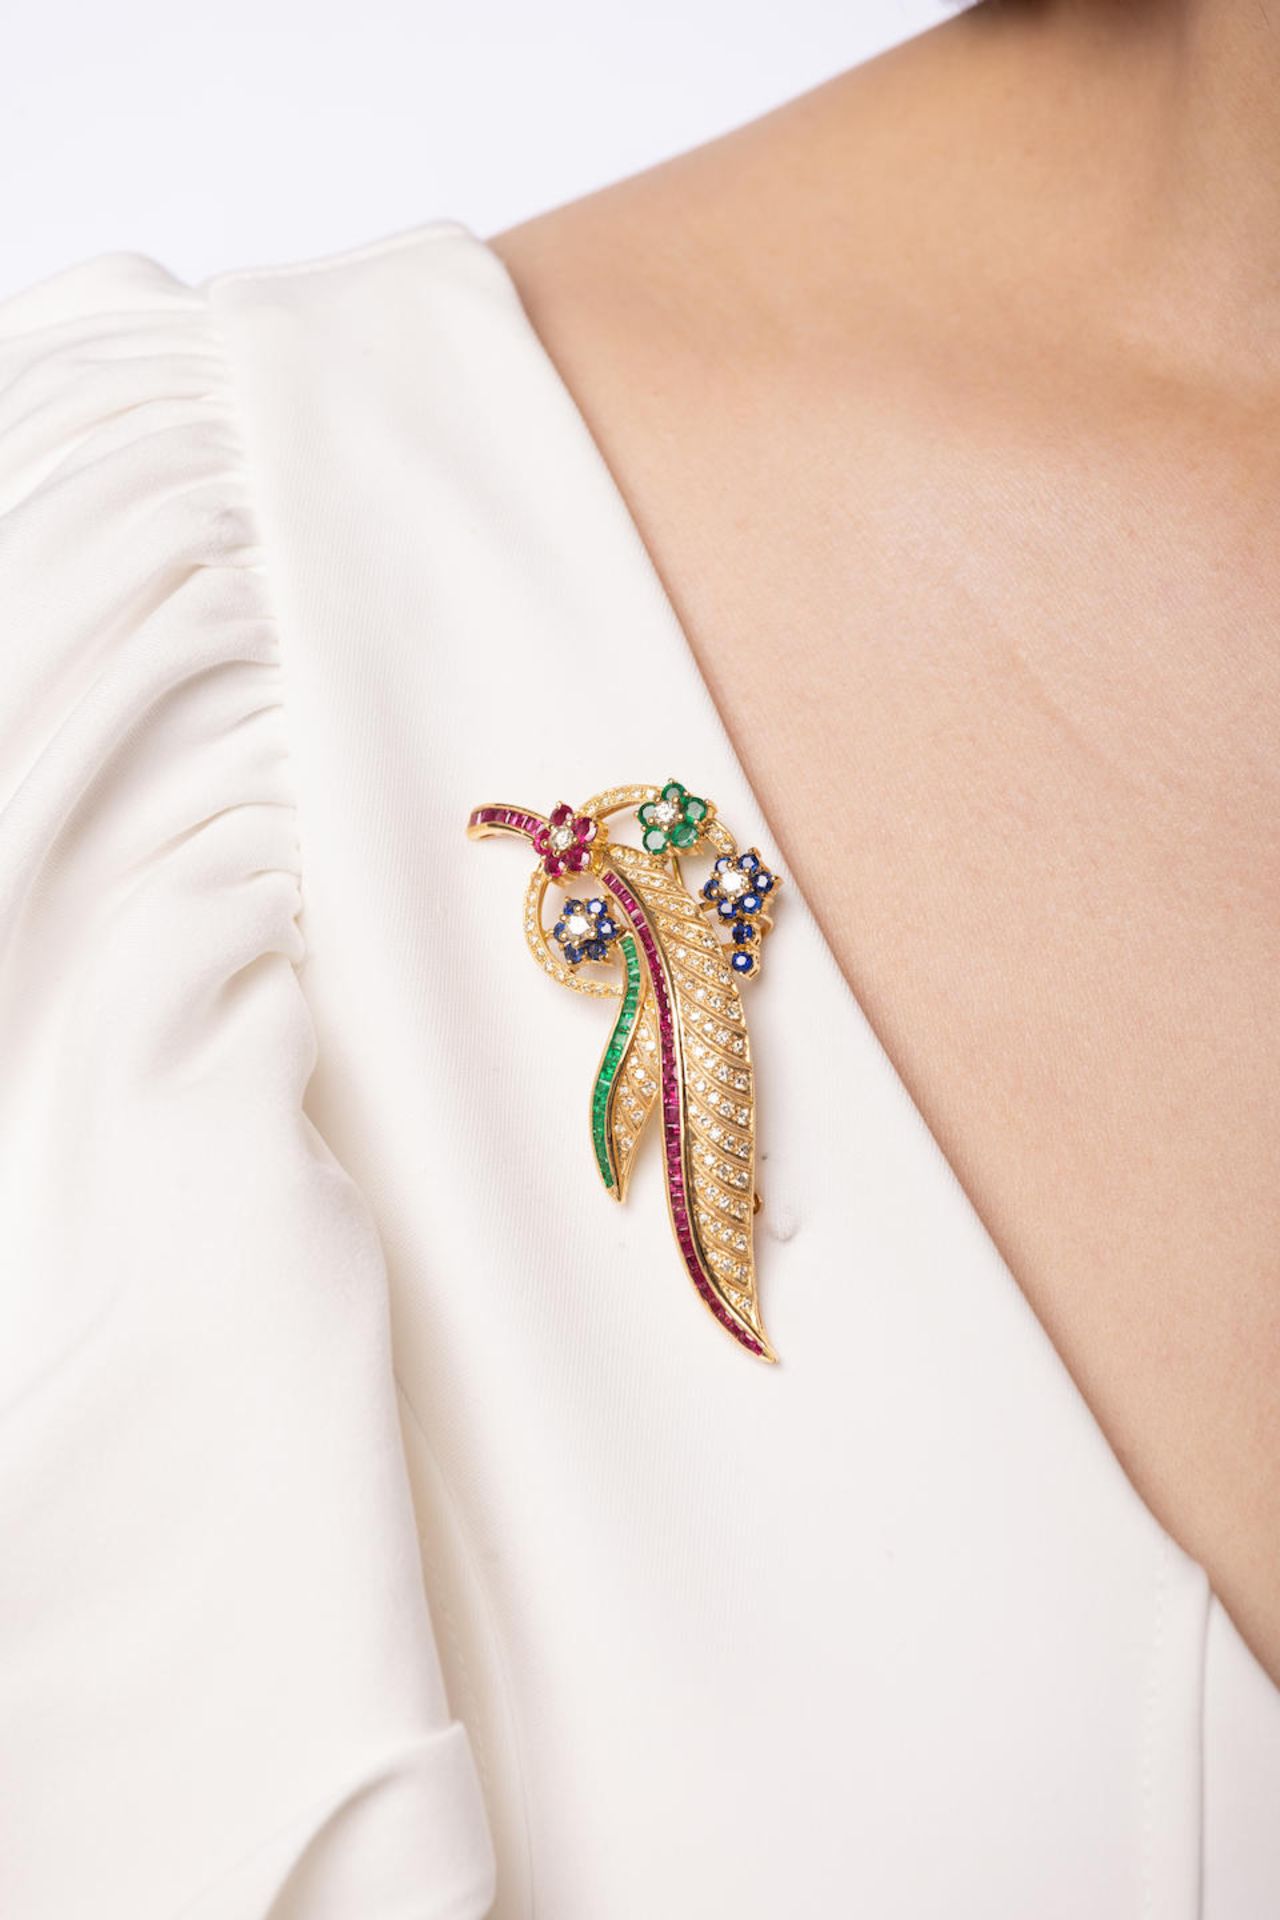 GEM-SET AND DIAMOND 'FEATHER' BROOCH - Image 2 of 2